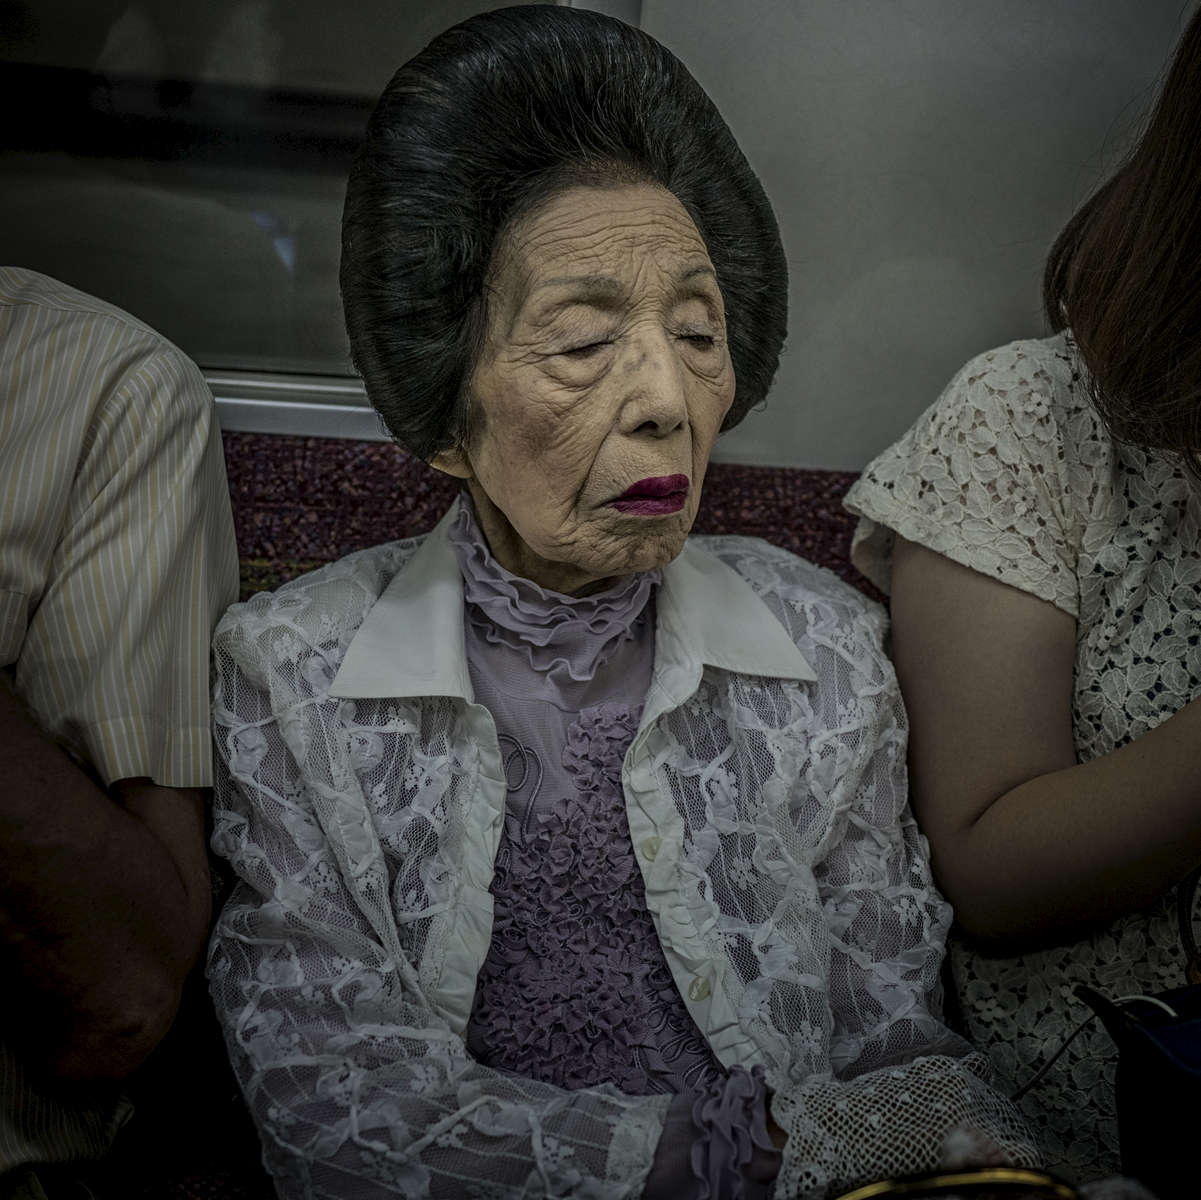 Matriarch with gloves and red lipstick on the train in Tokyo.  Japan.